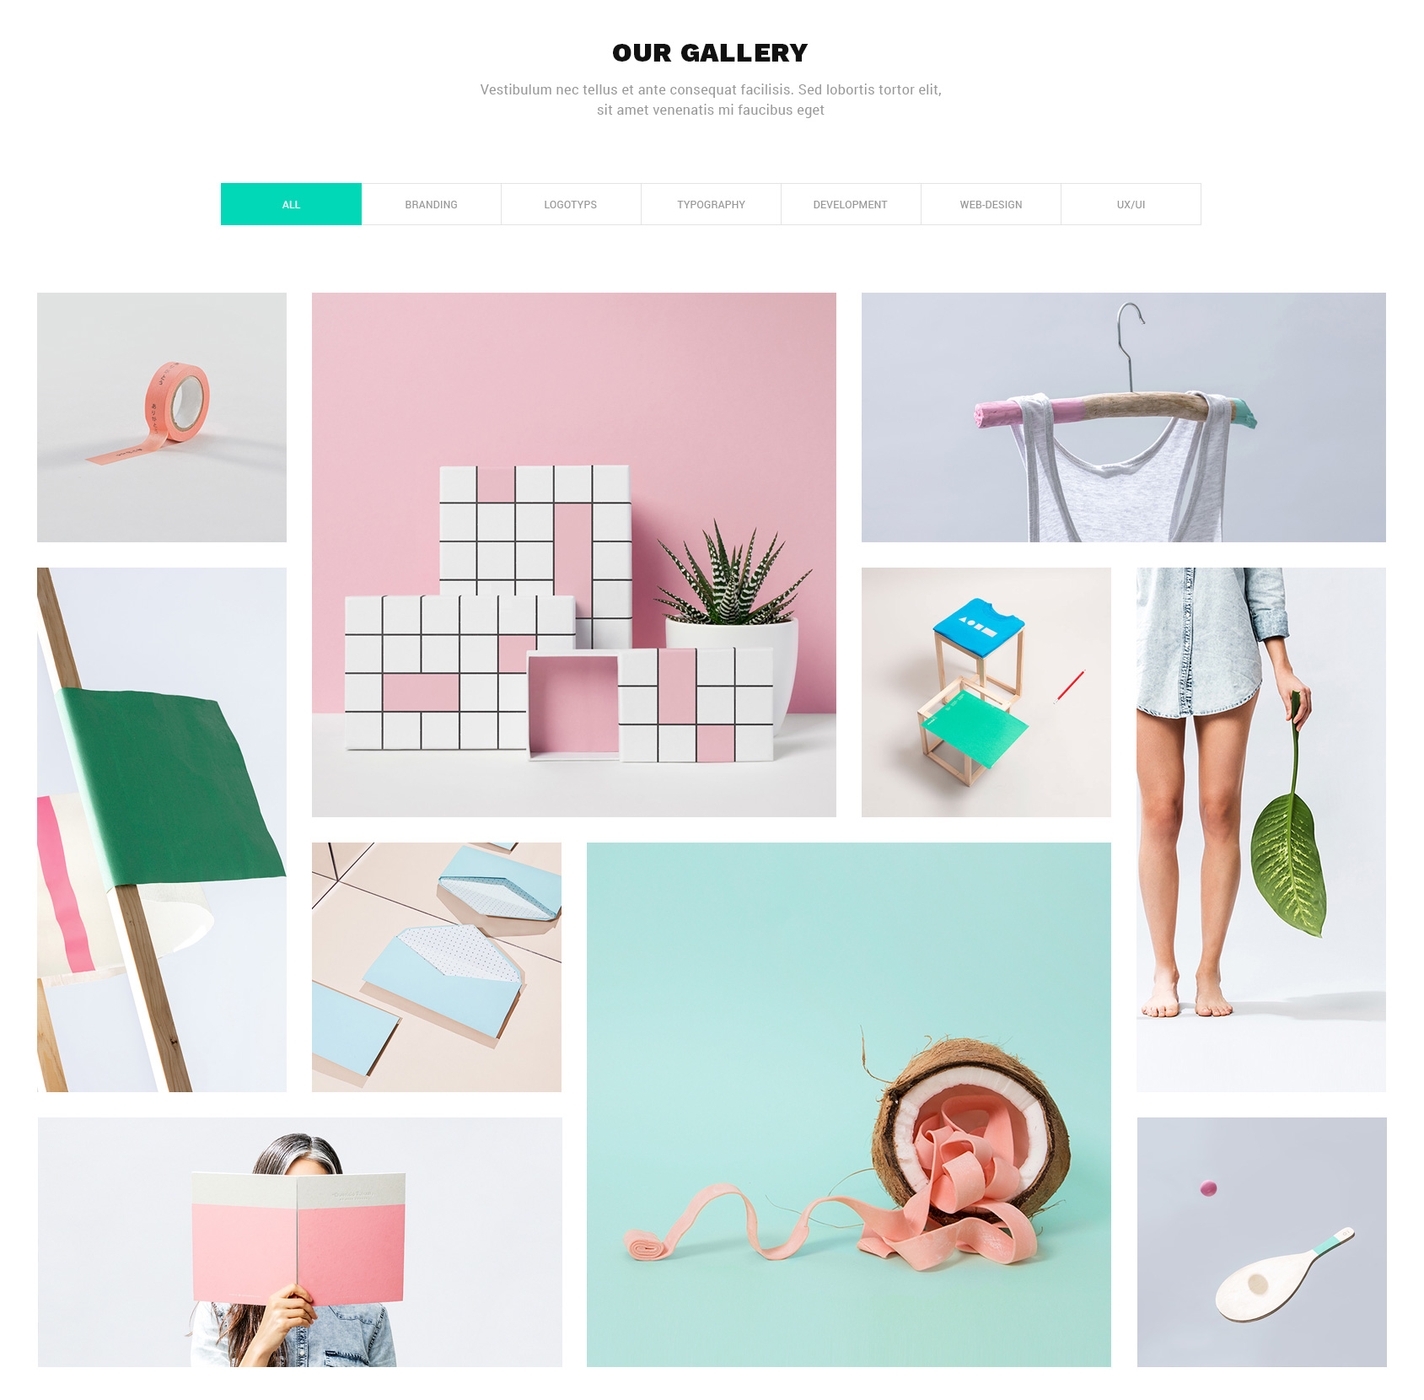 HTML5 Bootstrap Image Gallery Theme